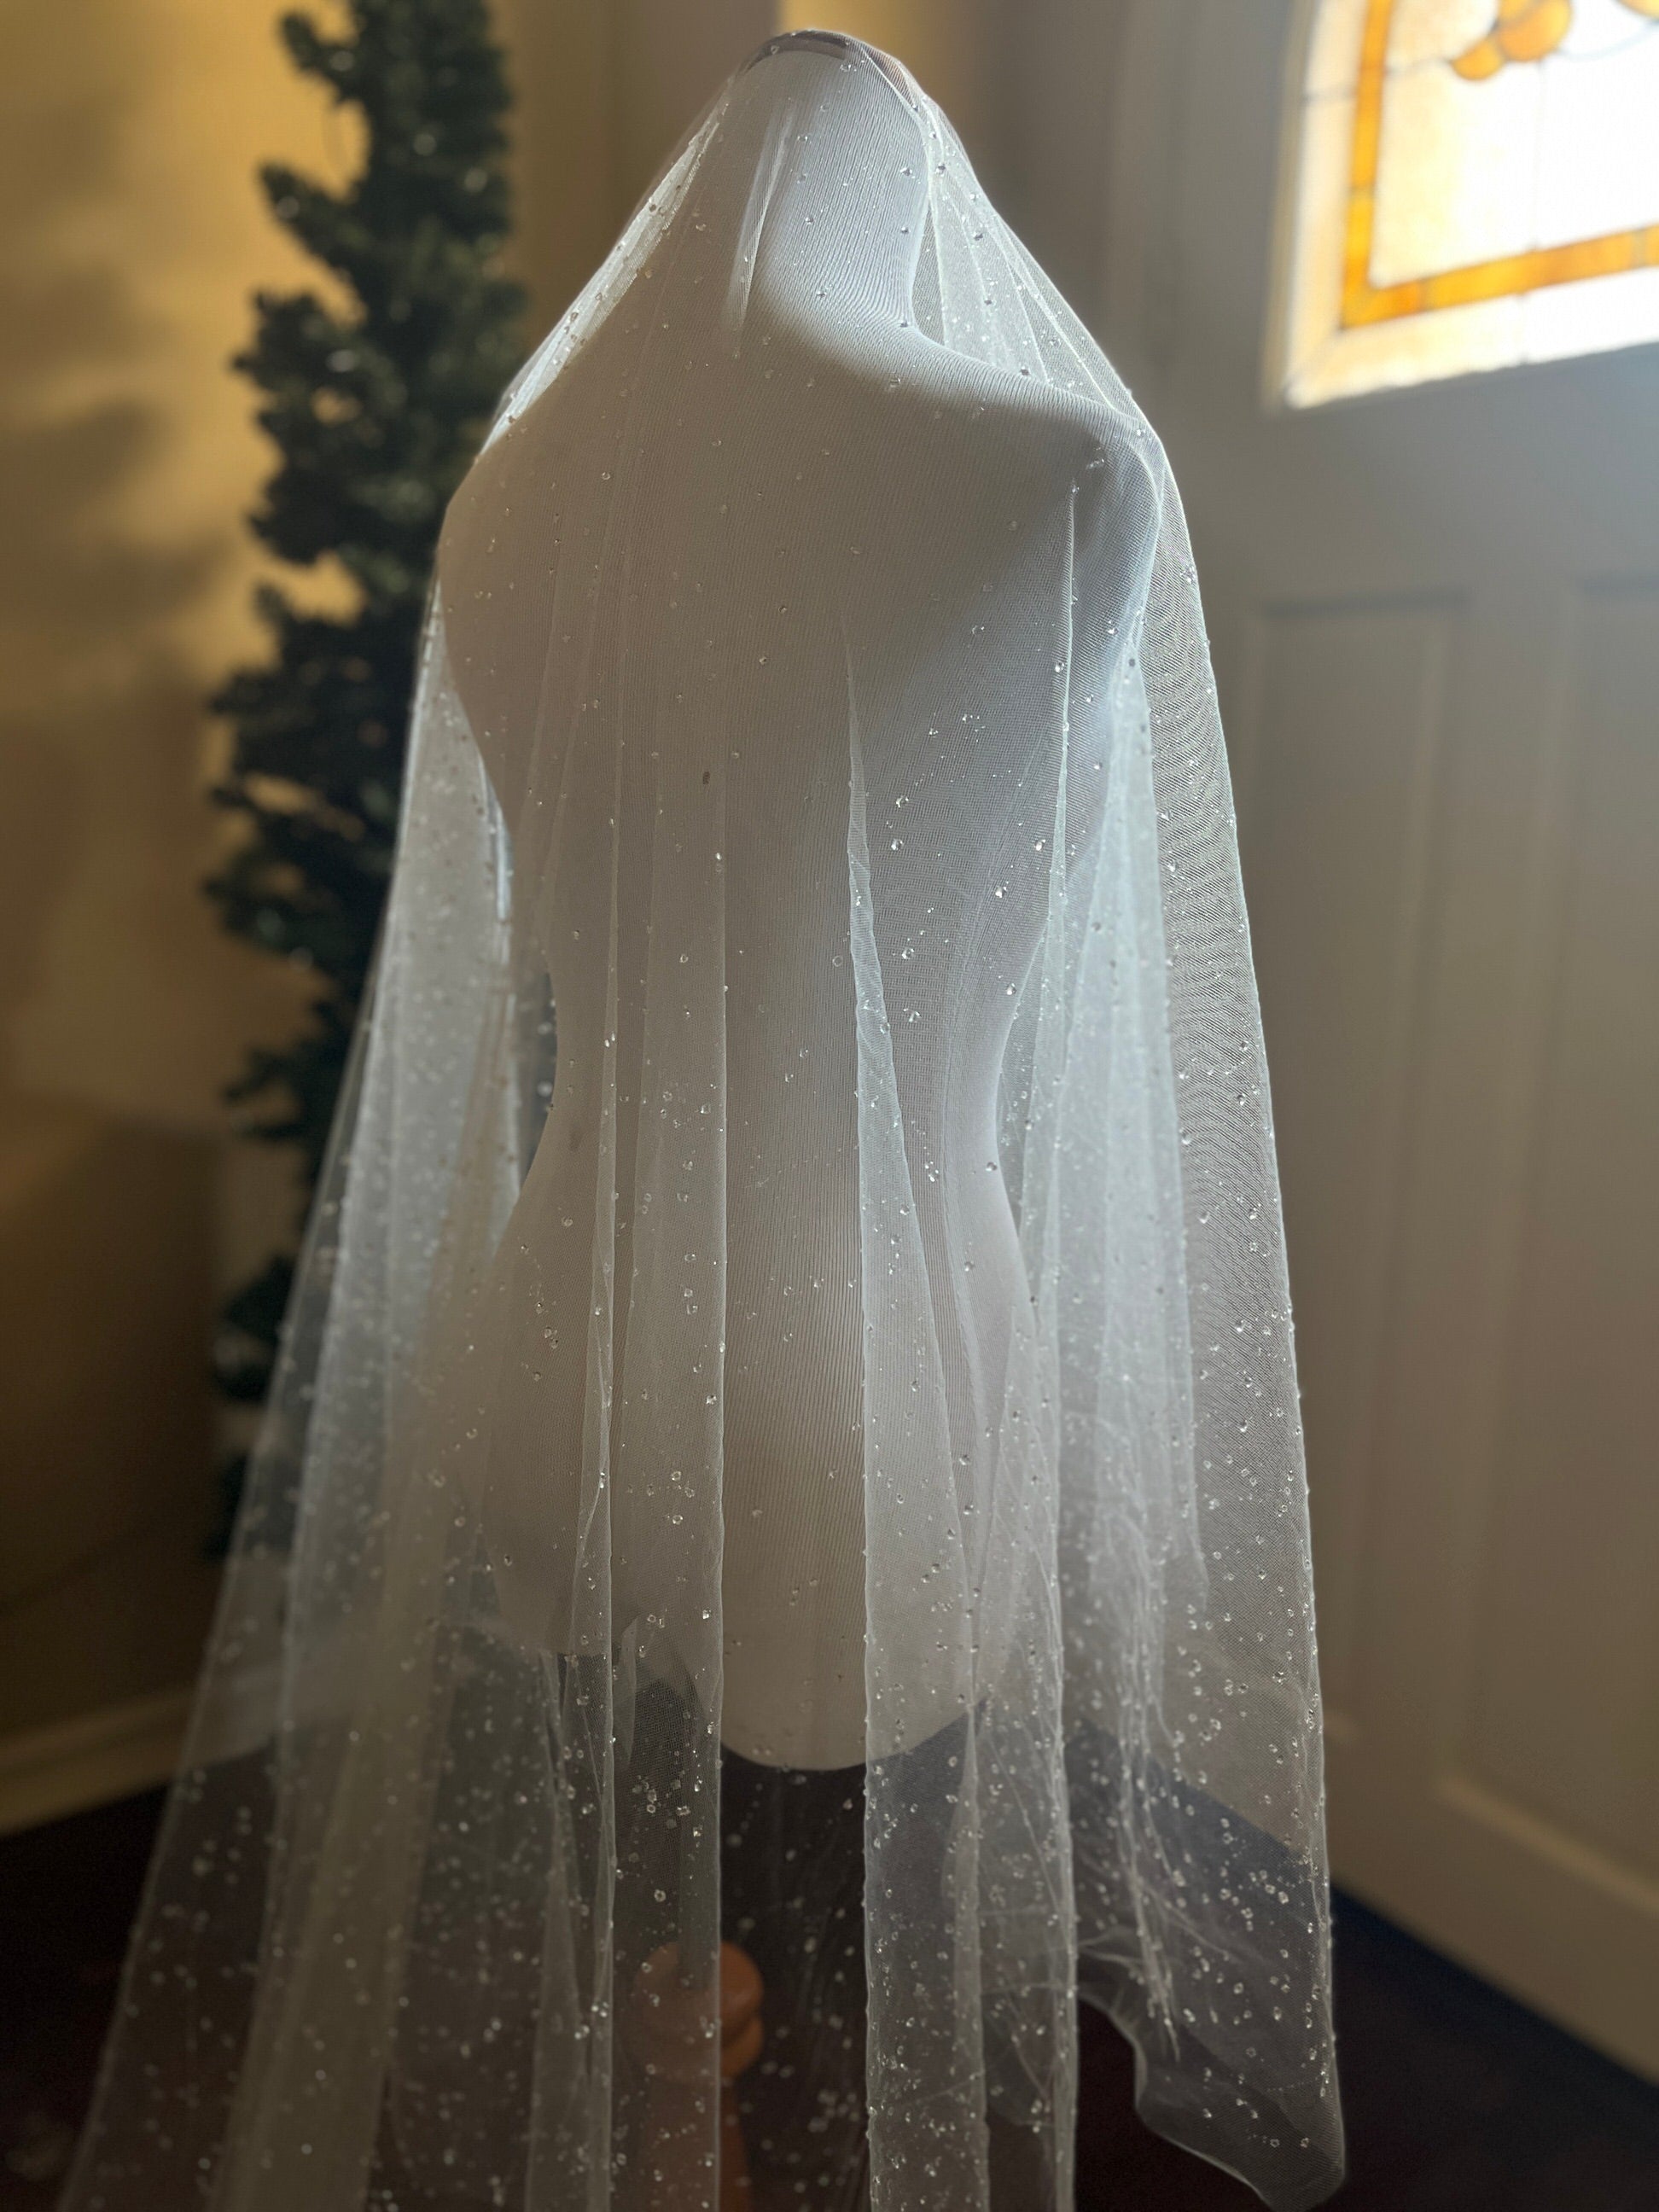 Sofia Richie inspired wedding veil with droplet beading